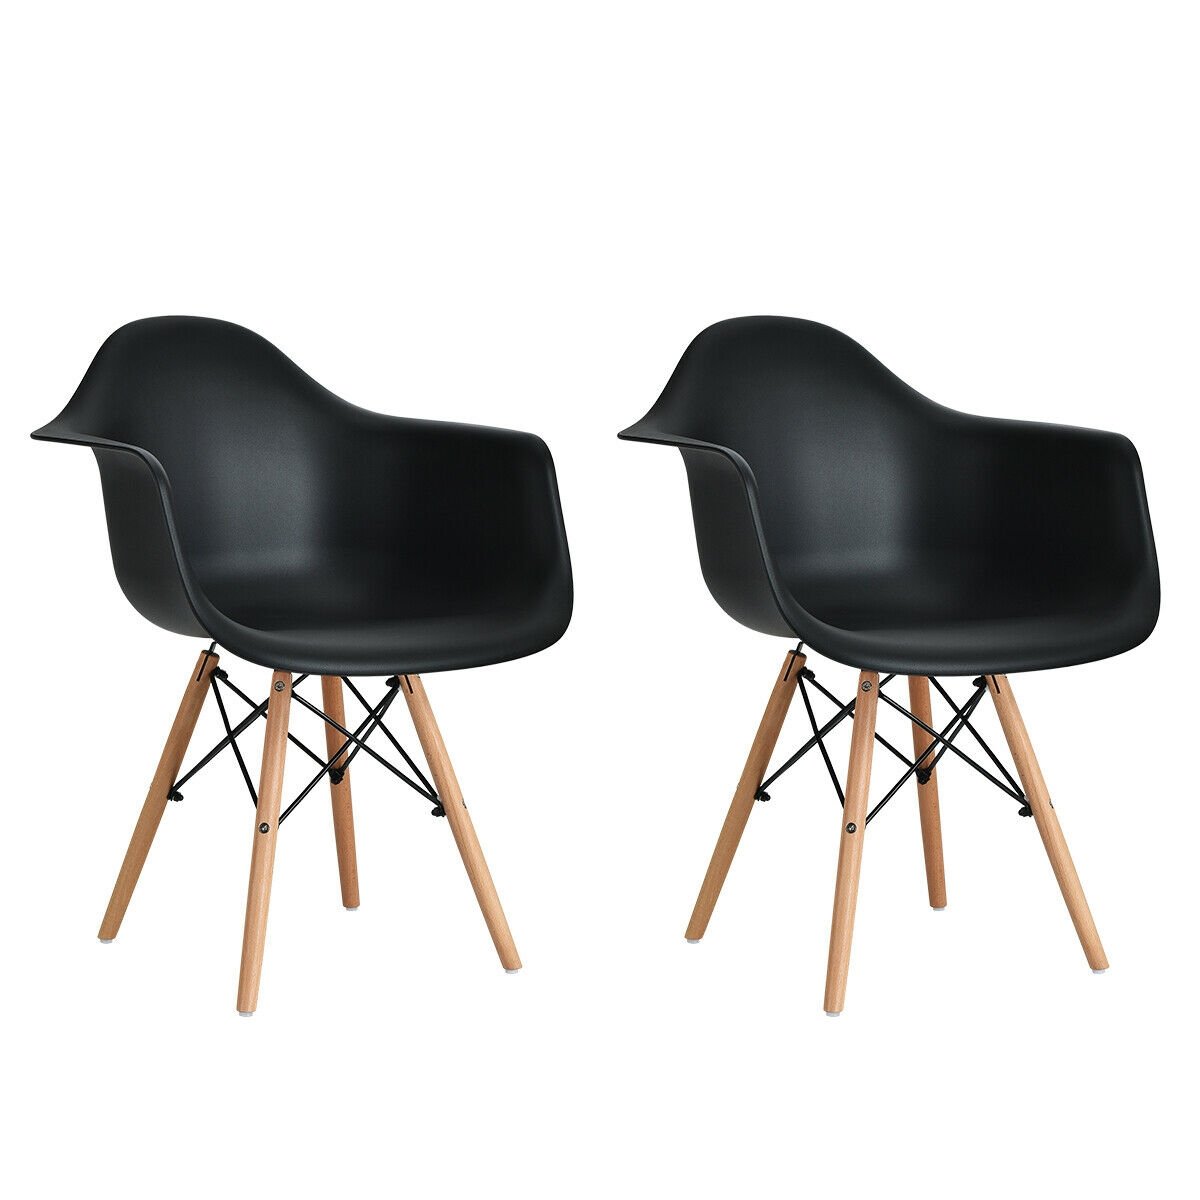 Set of 2 Mid-Century Modern Molded Dining Arm Side Chairs, Black